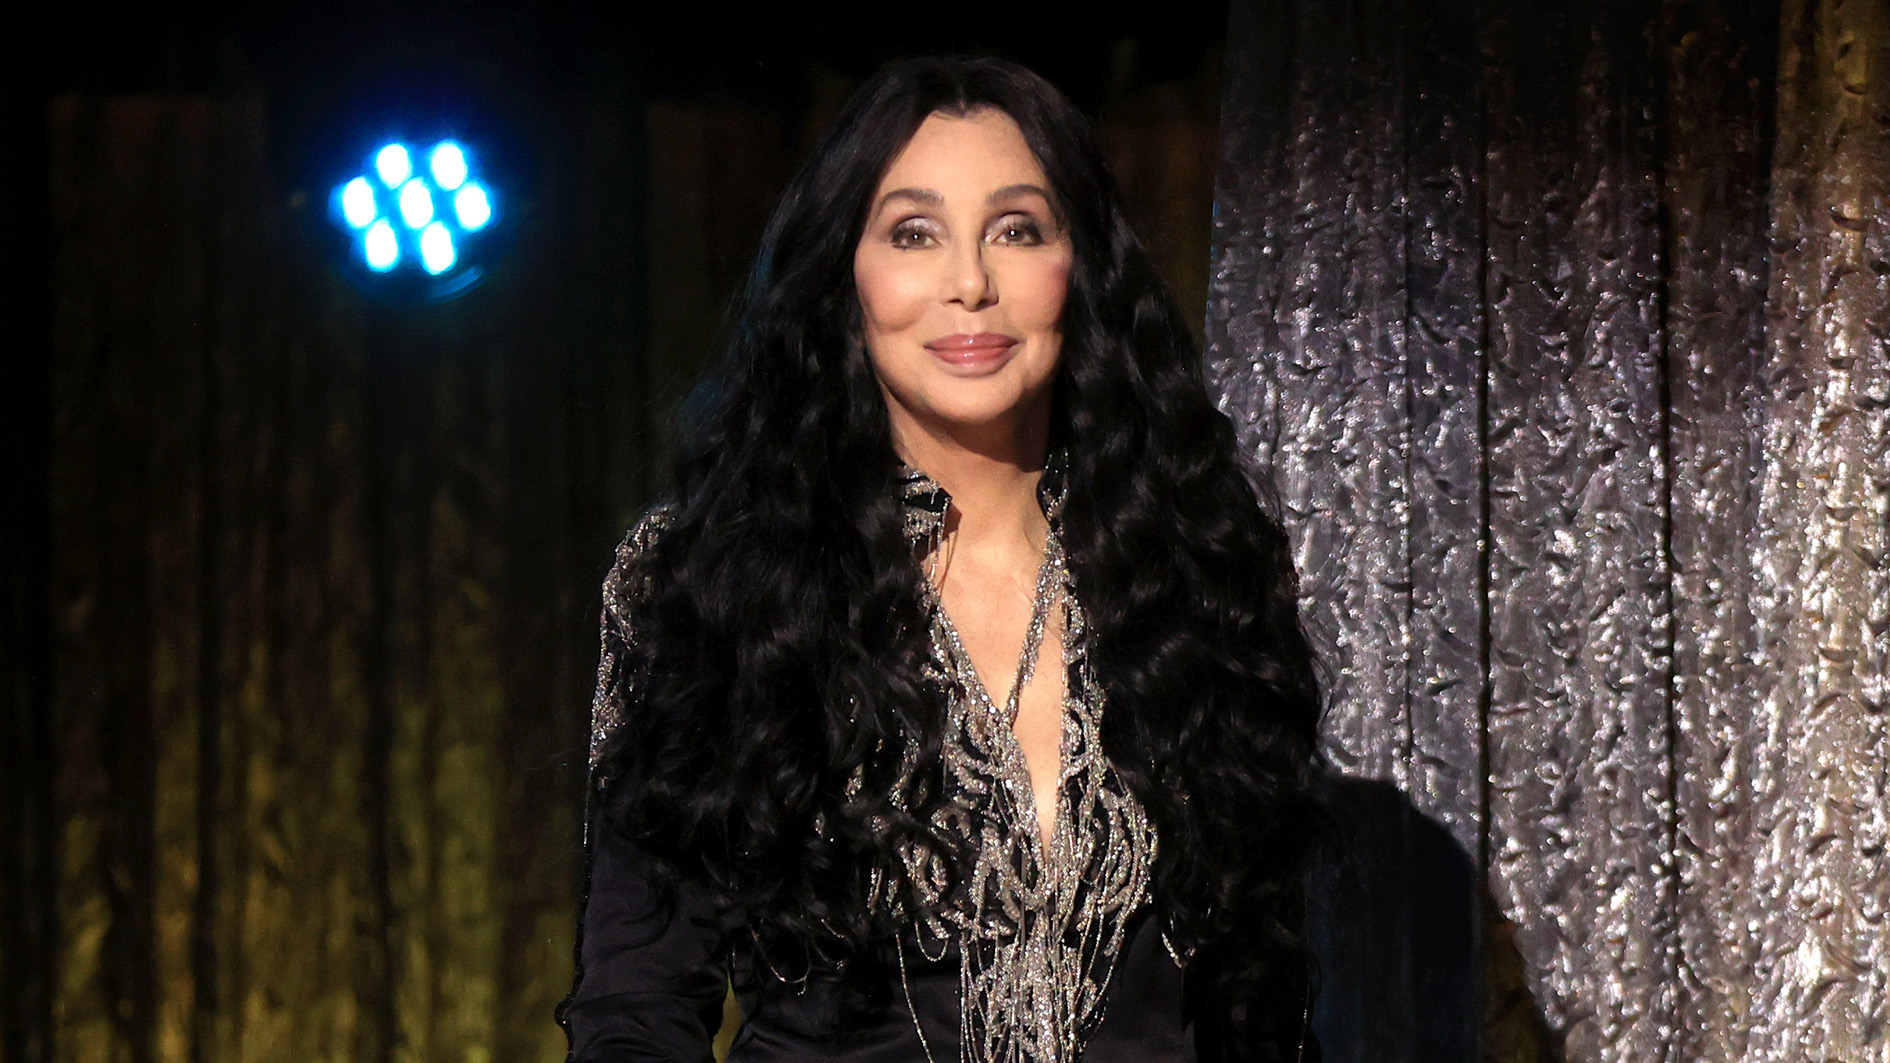 Music icon Cher won't be letting her hair go grey